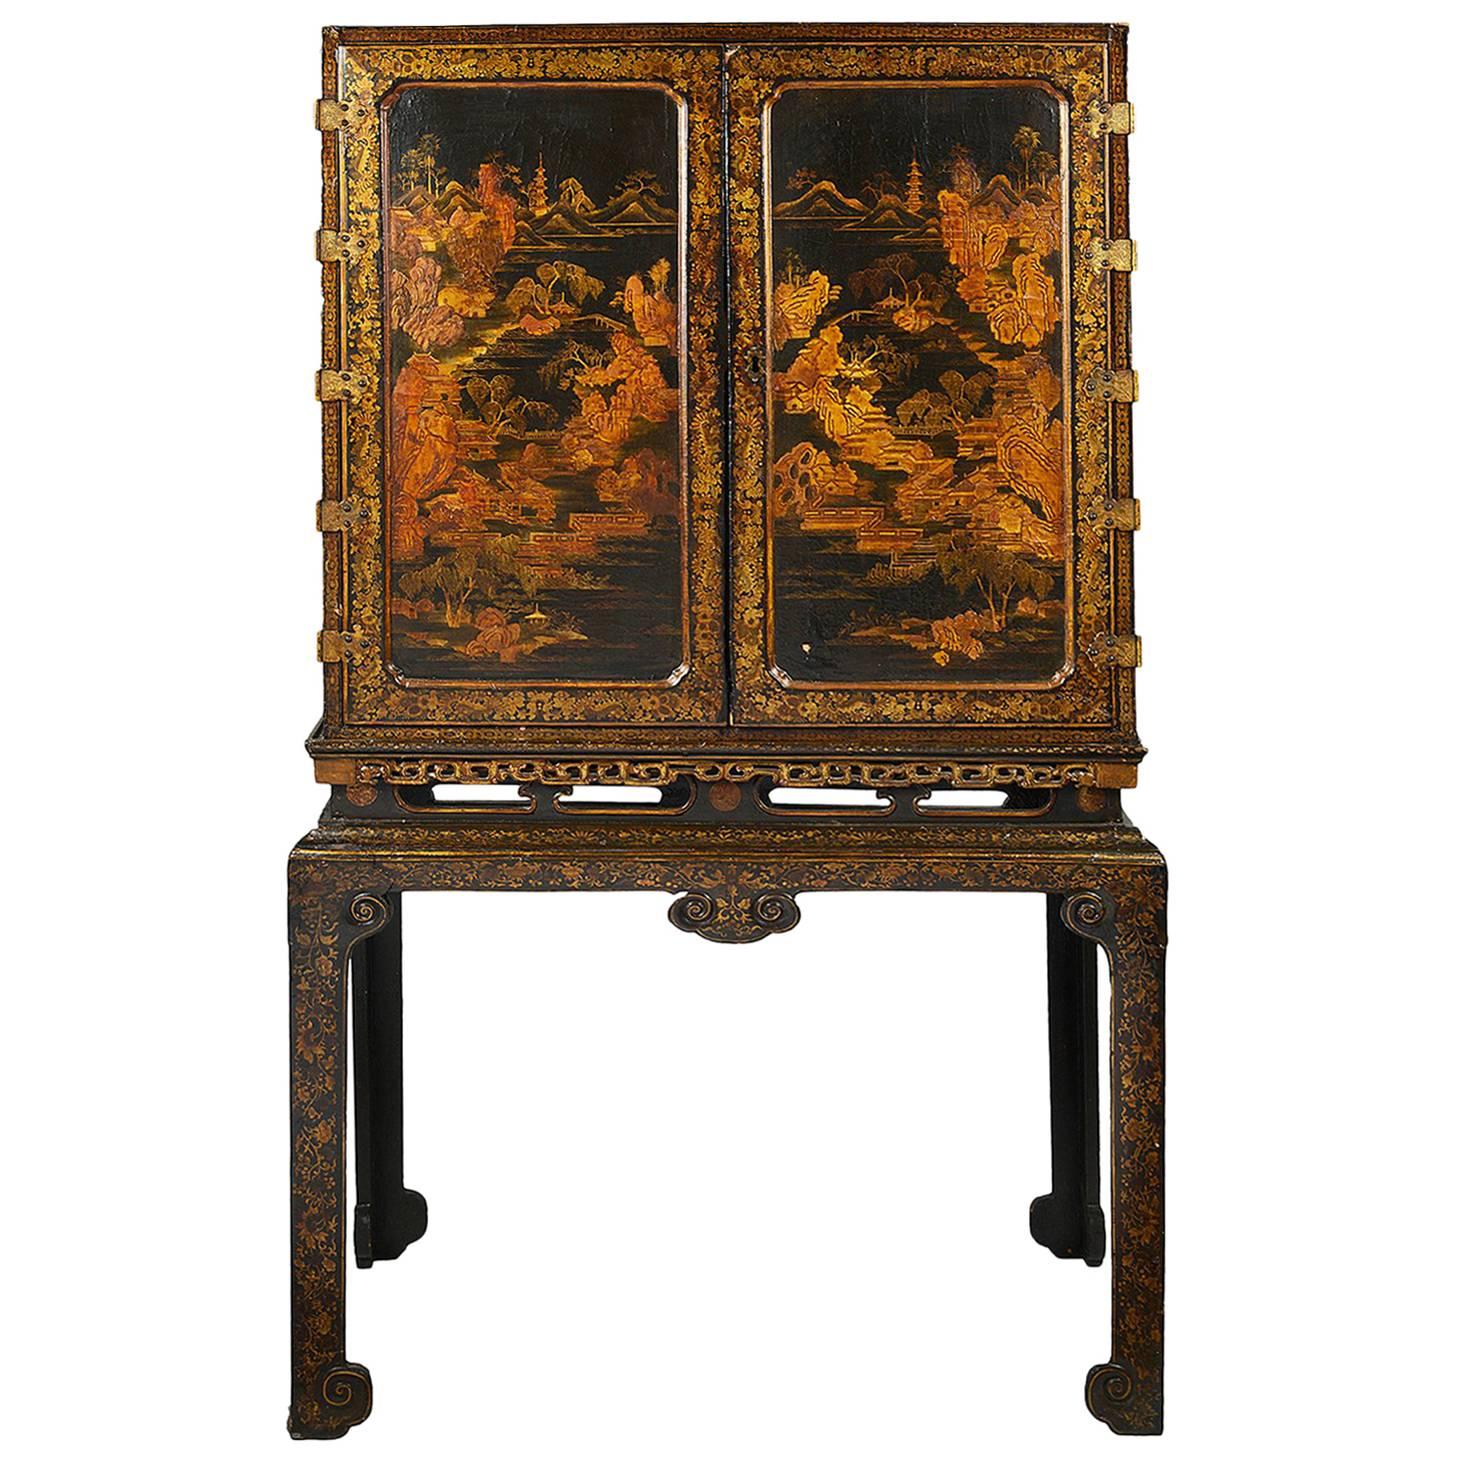 18th Century Lacquer Cabinet on Stand